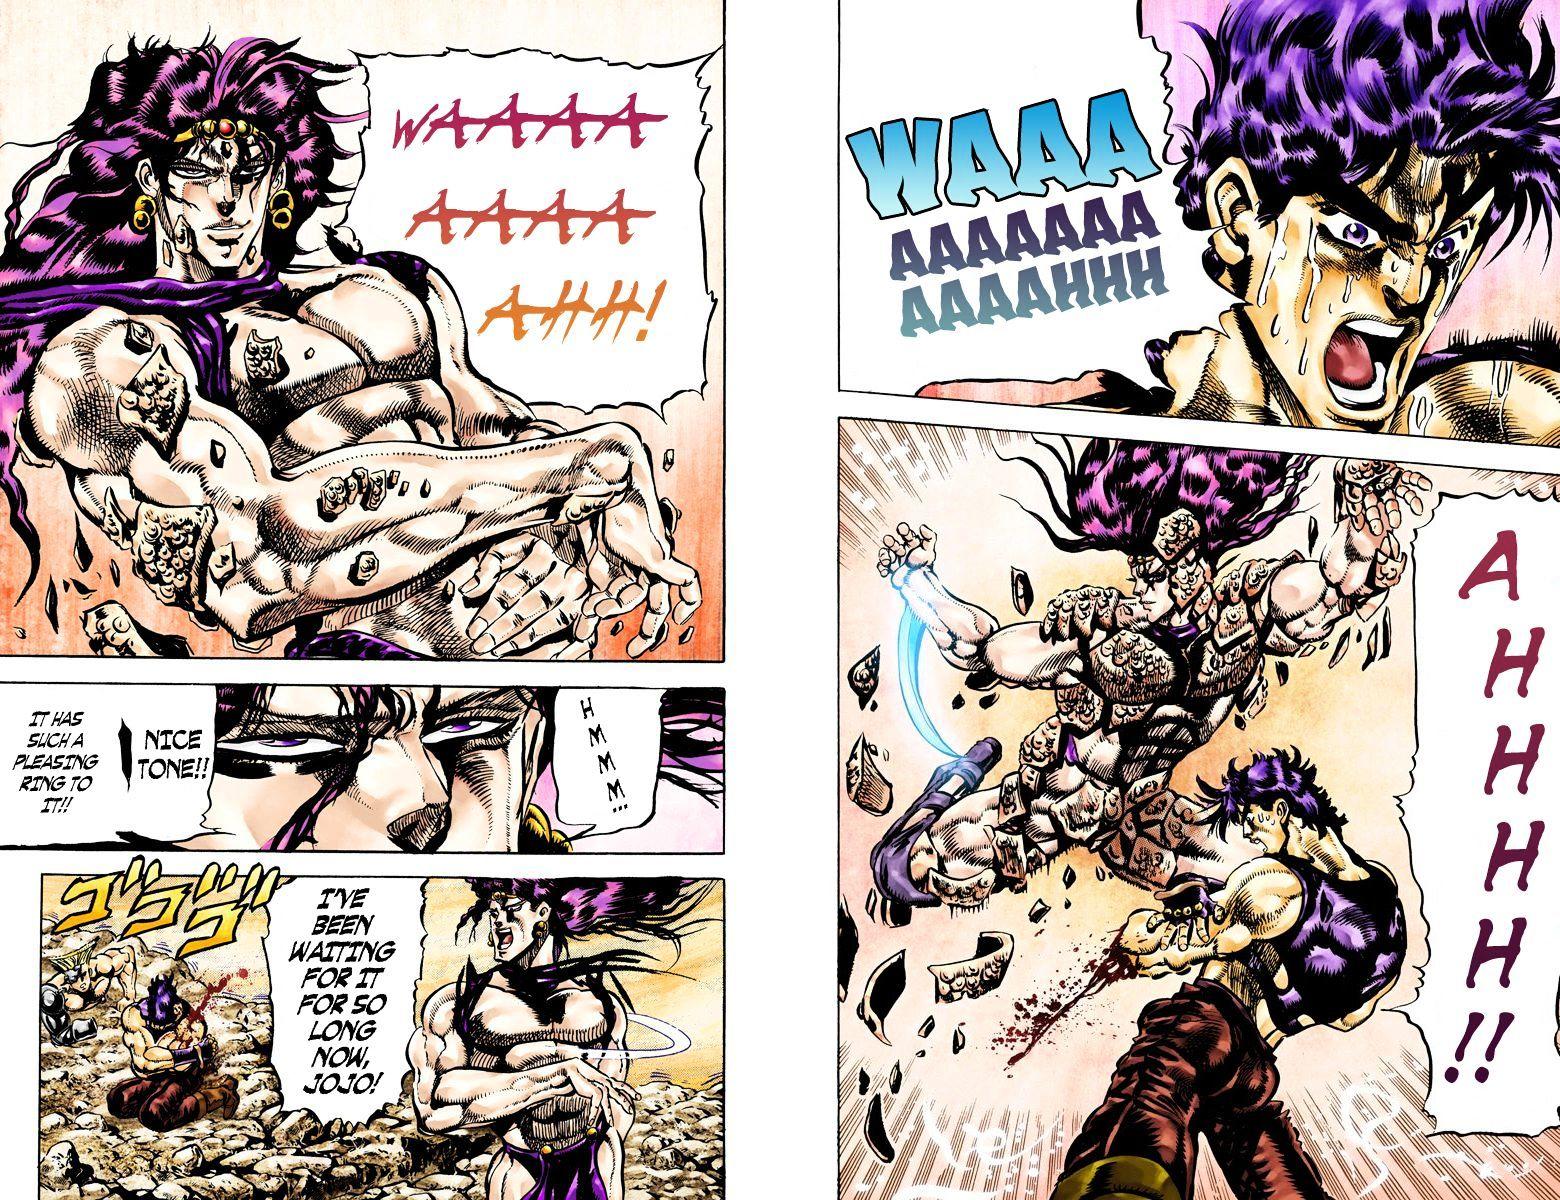 Jojo's Bizarre Adventure Vol.12 Chapter 111 : The Man Who Became A God (Official Color Scans) page 9 - 